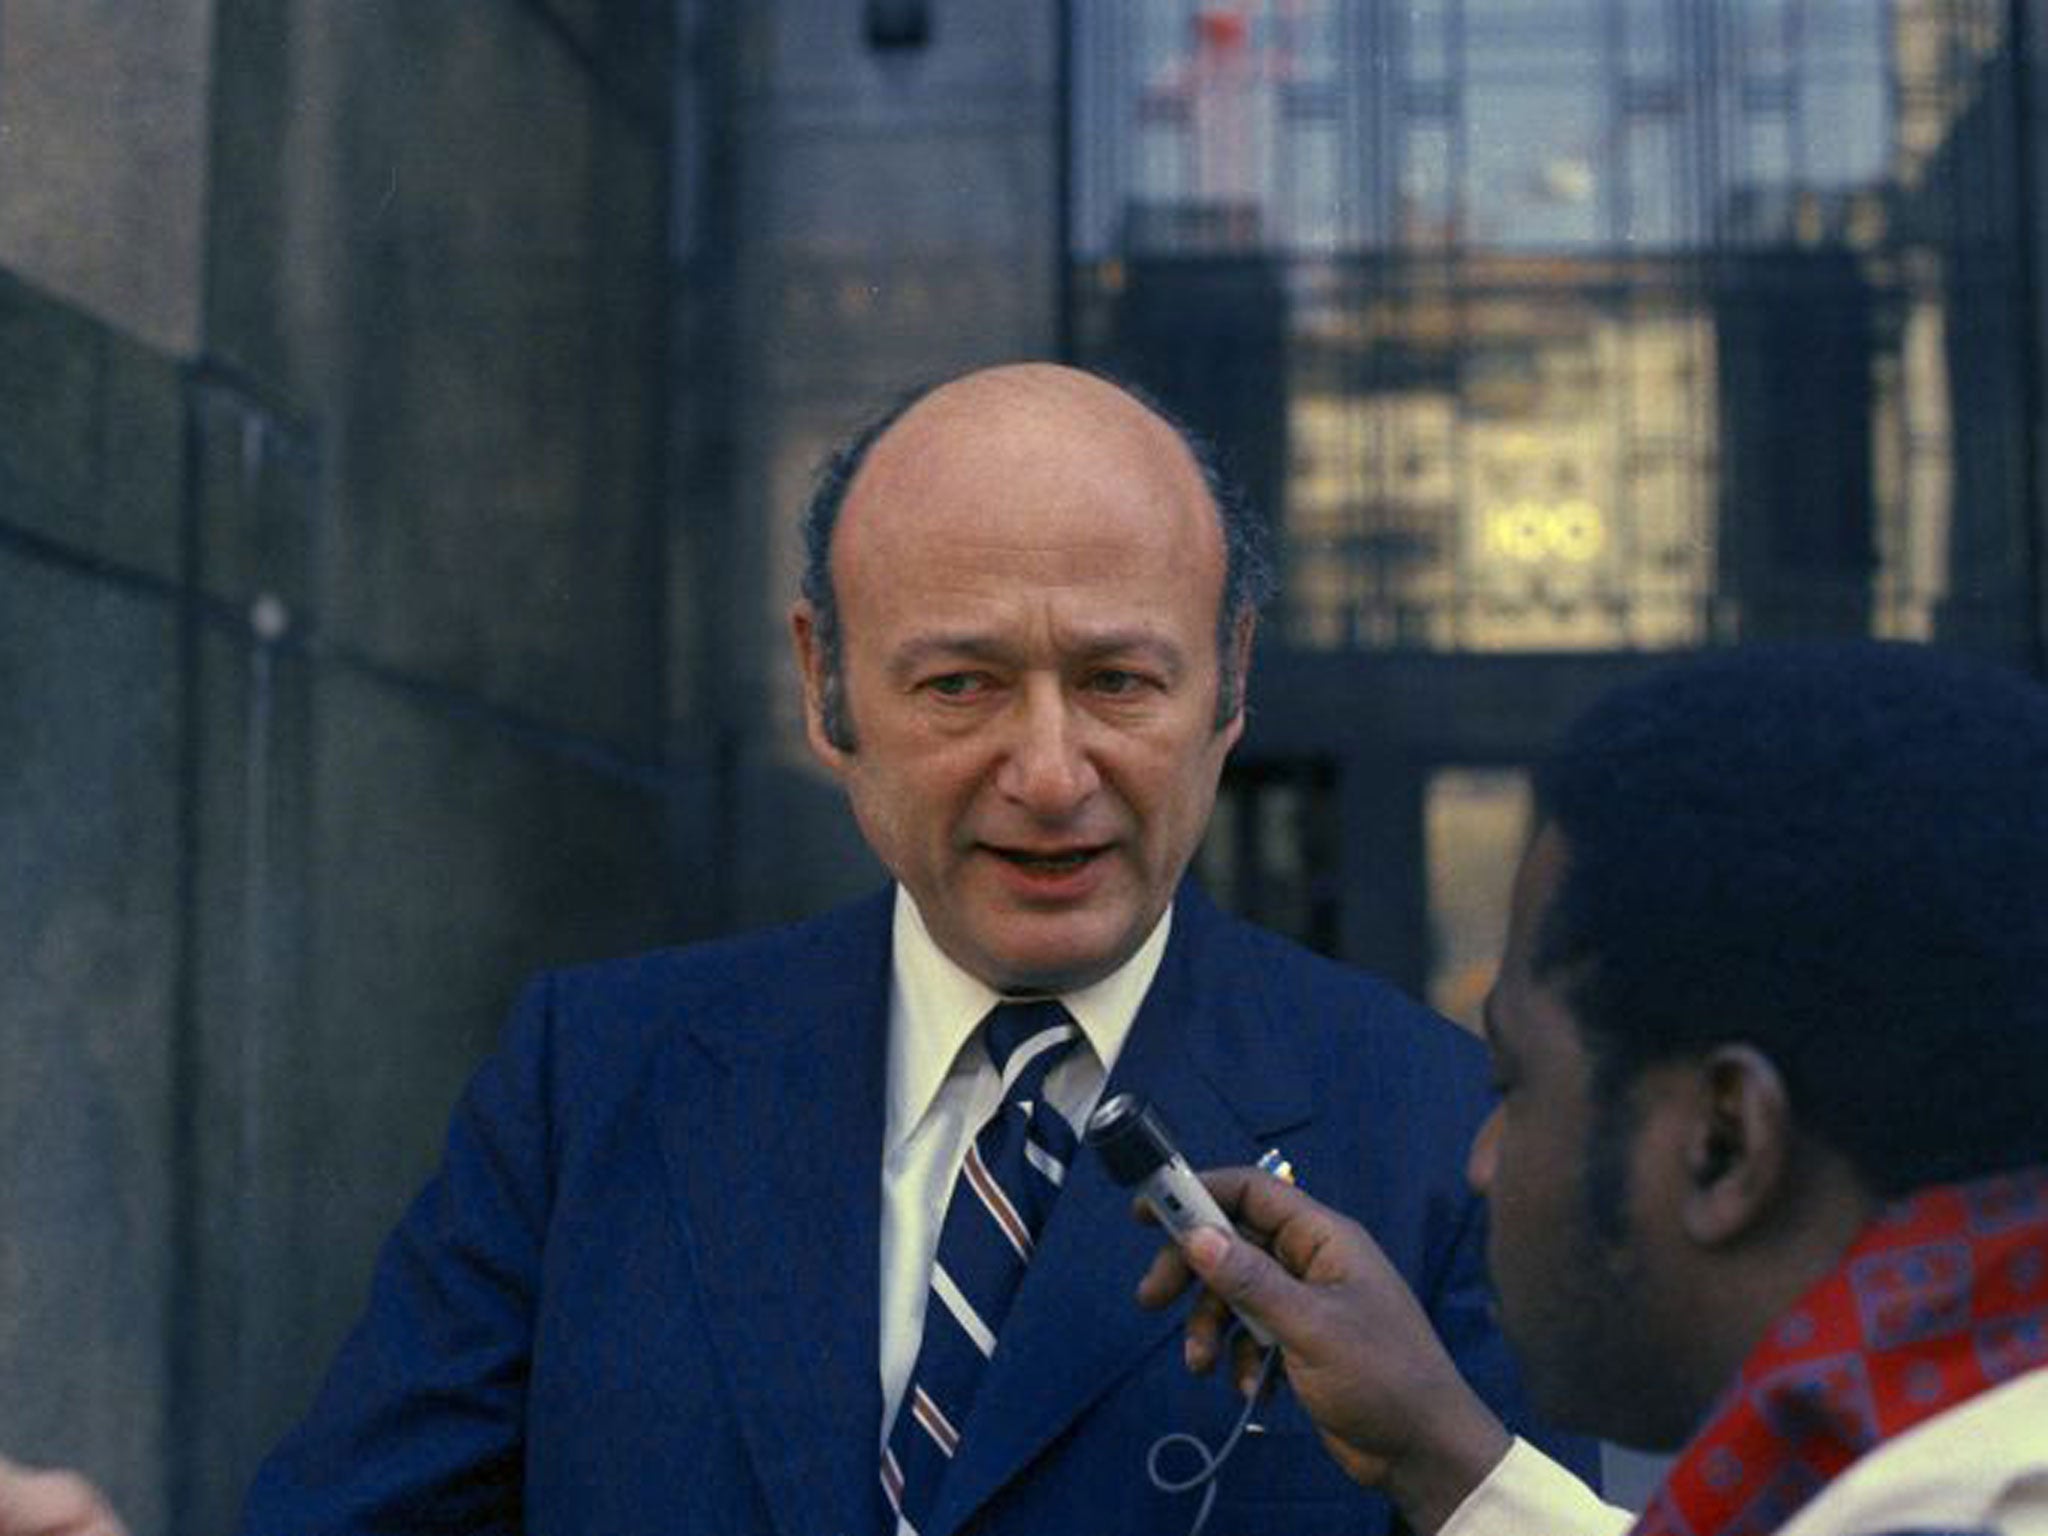 Koch in 1973, during his first, unsuccessful mayoral campaign